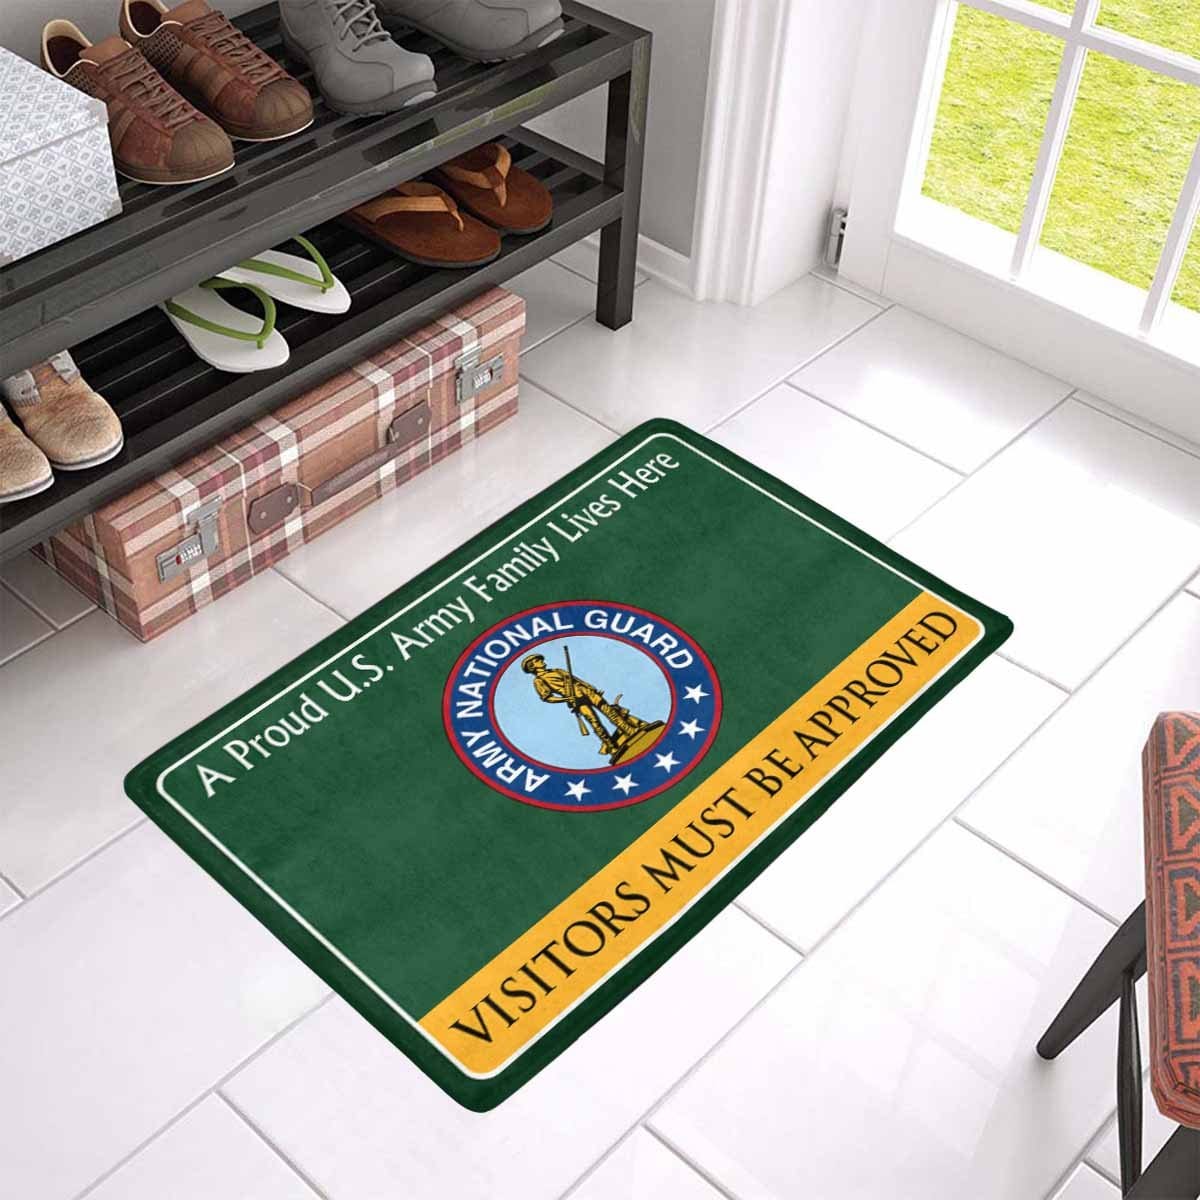 US Army Natinal Guard Family Doormat - Visitors must be approved Doormat (23.6 inches x 15.7 inches)-Doormat-Army-Branch-Veterans Nation